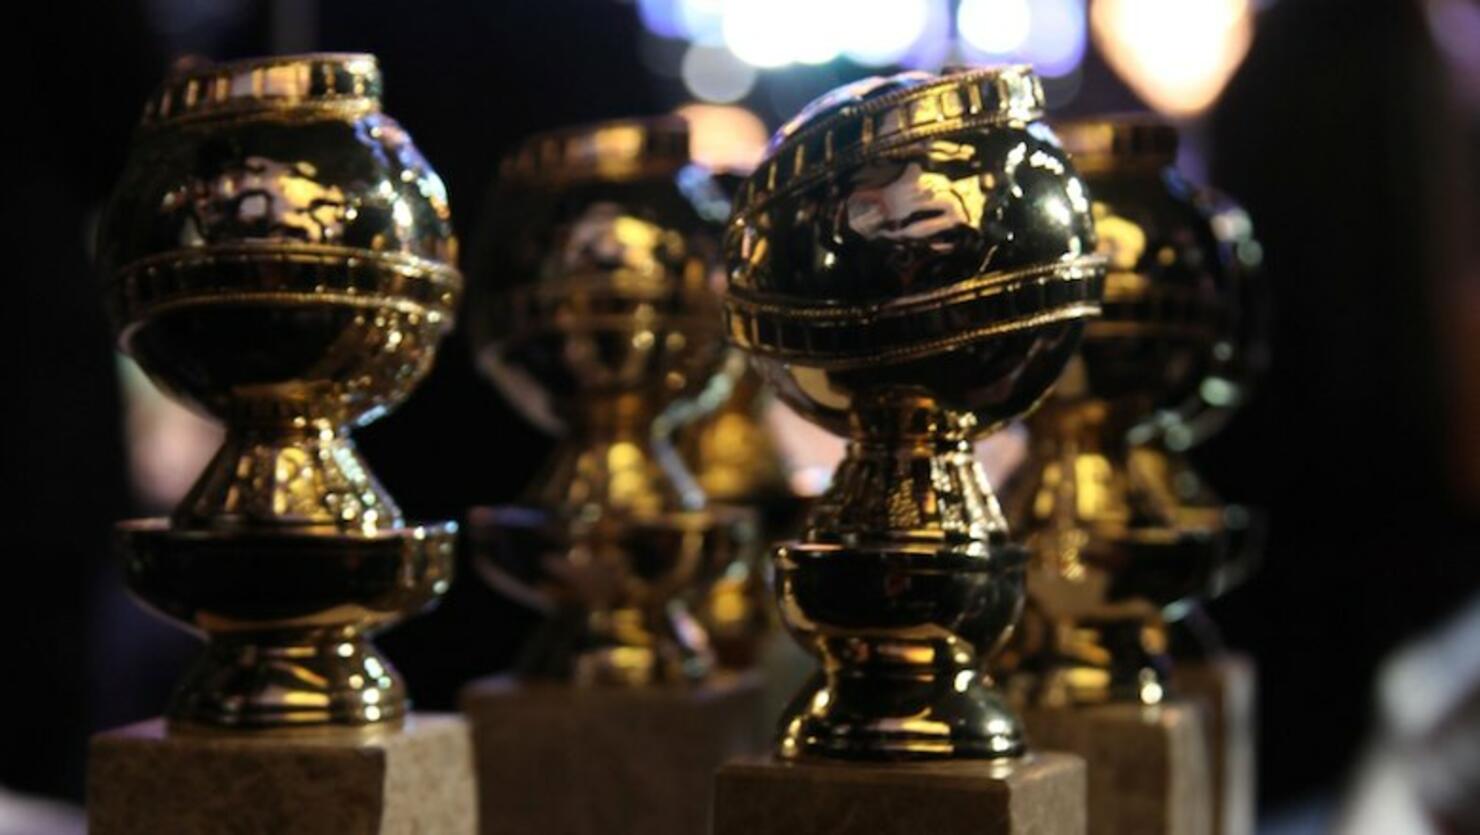 2019 Golden Globes Winners: The Complete List